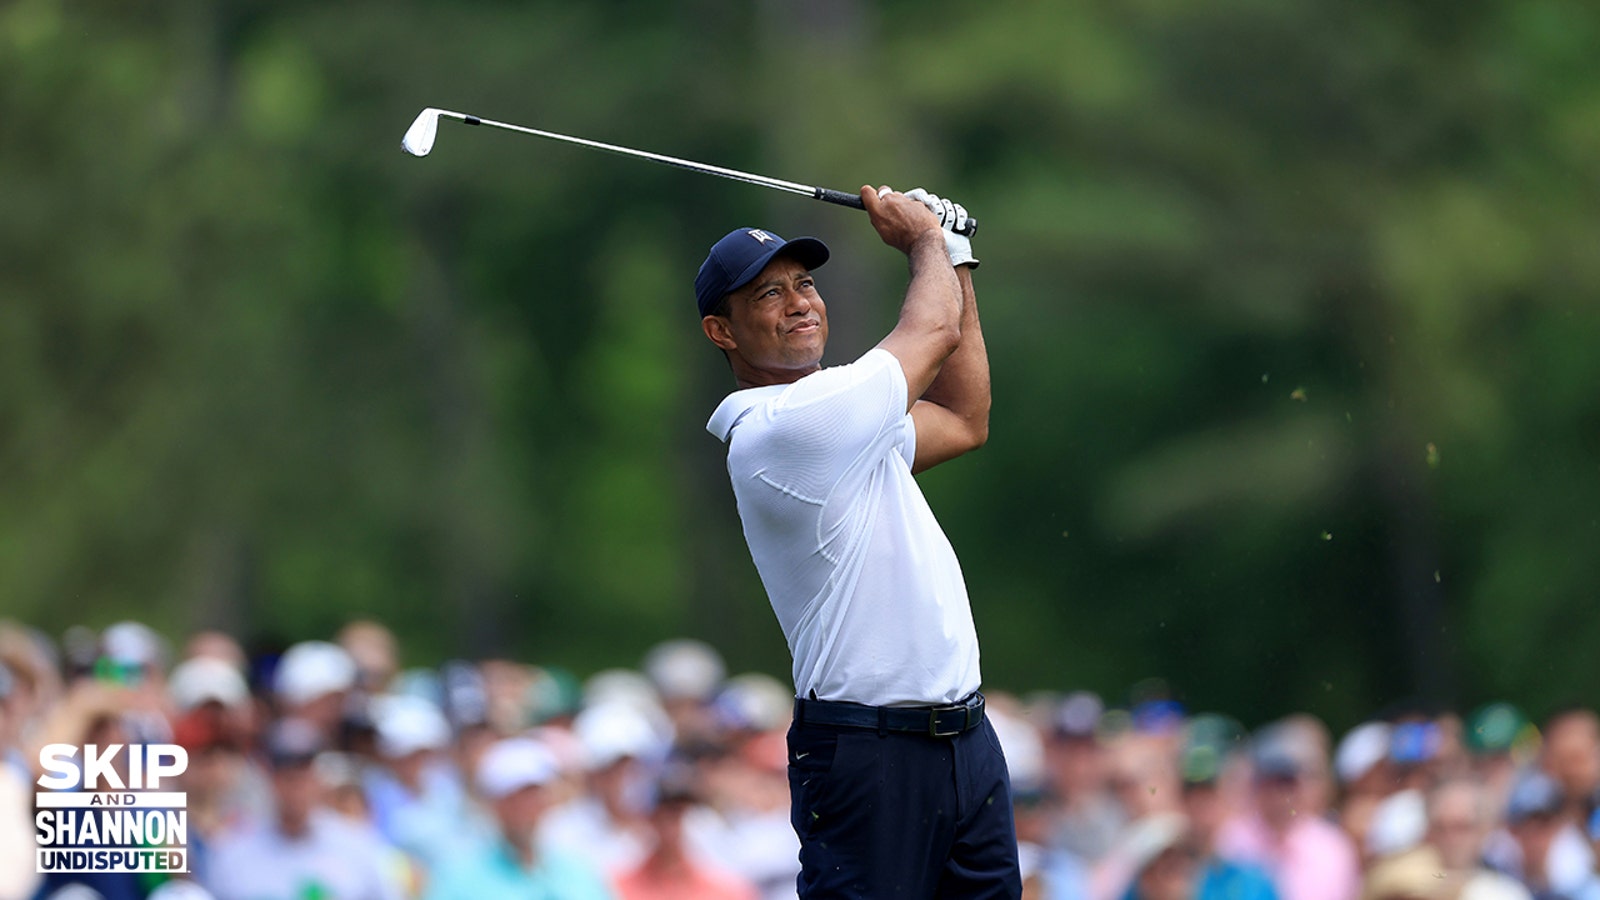 Tiger Woods finishes +2 (T-54th) in Round 1 of the Masters 